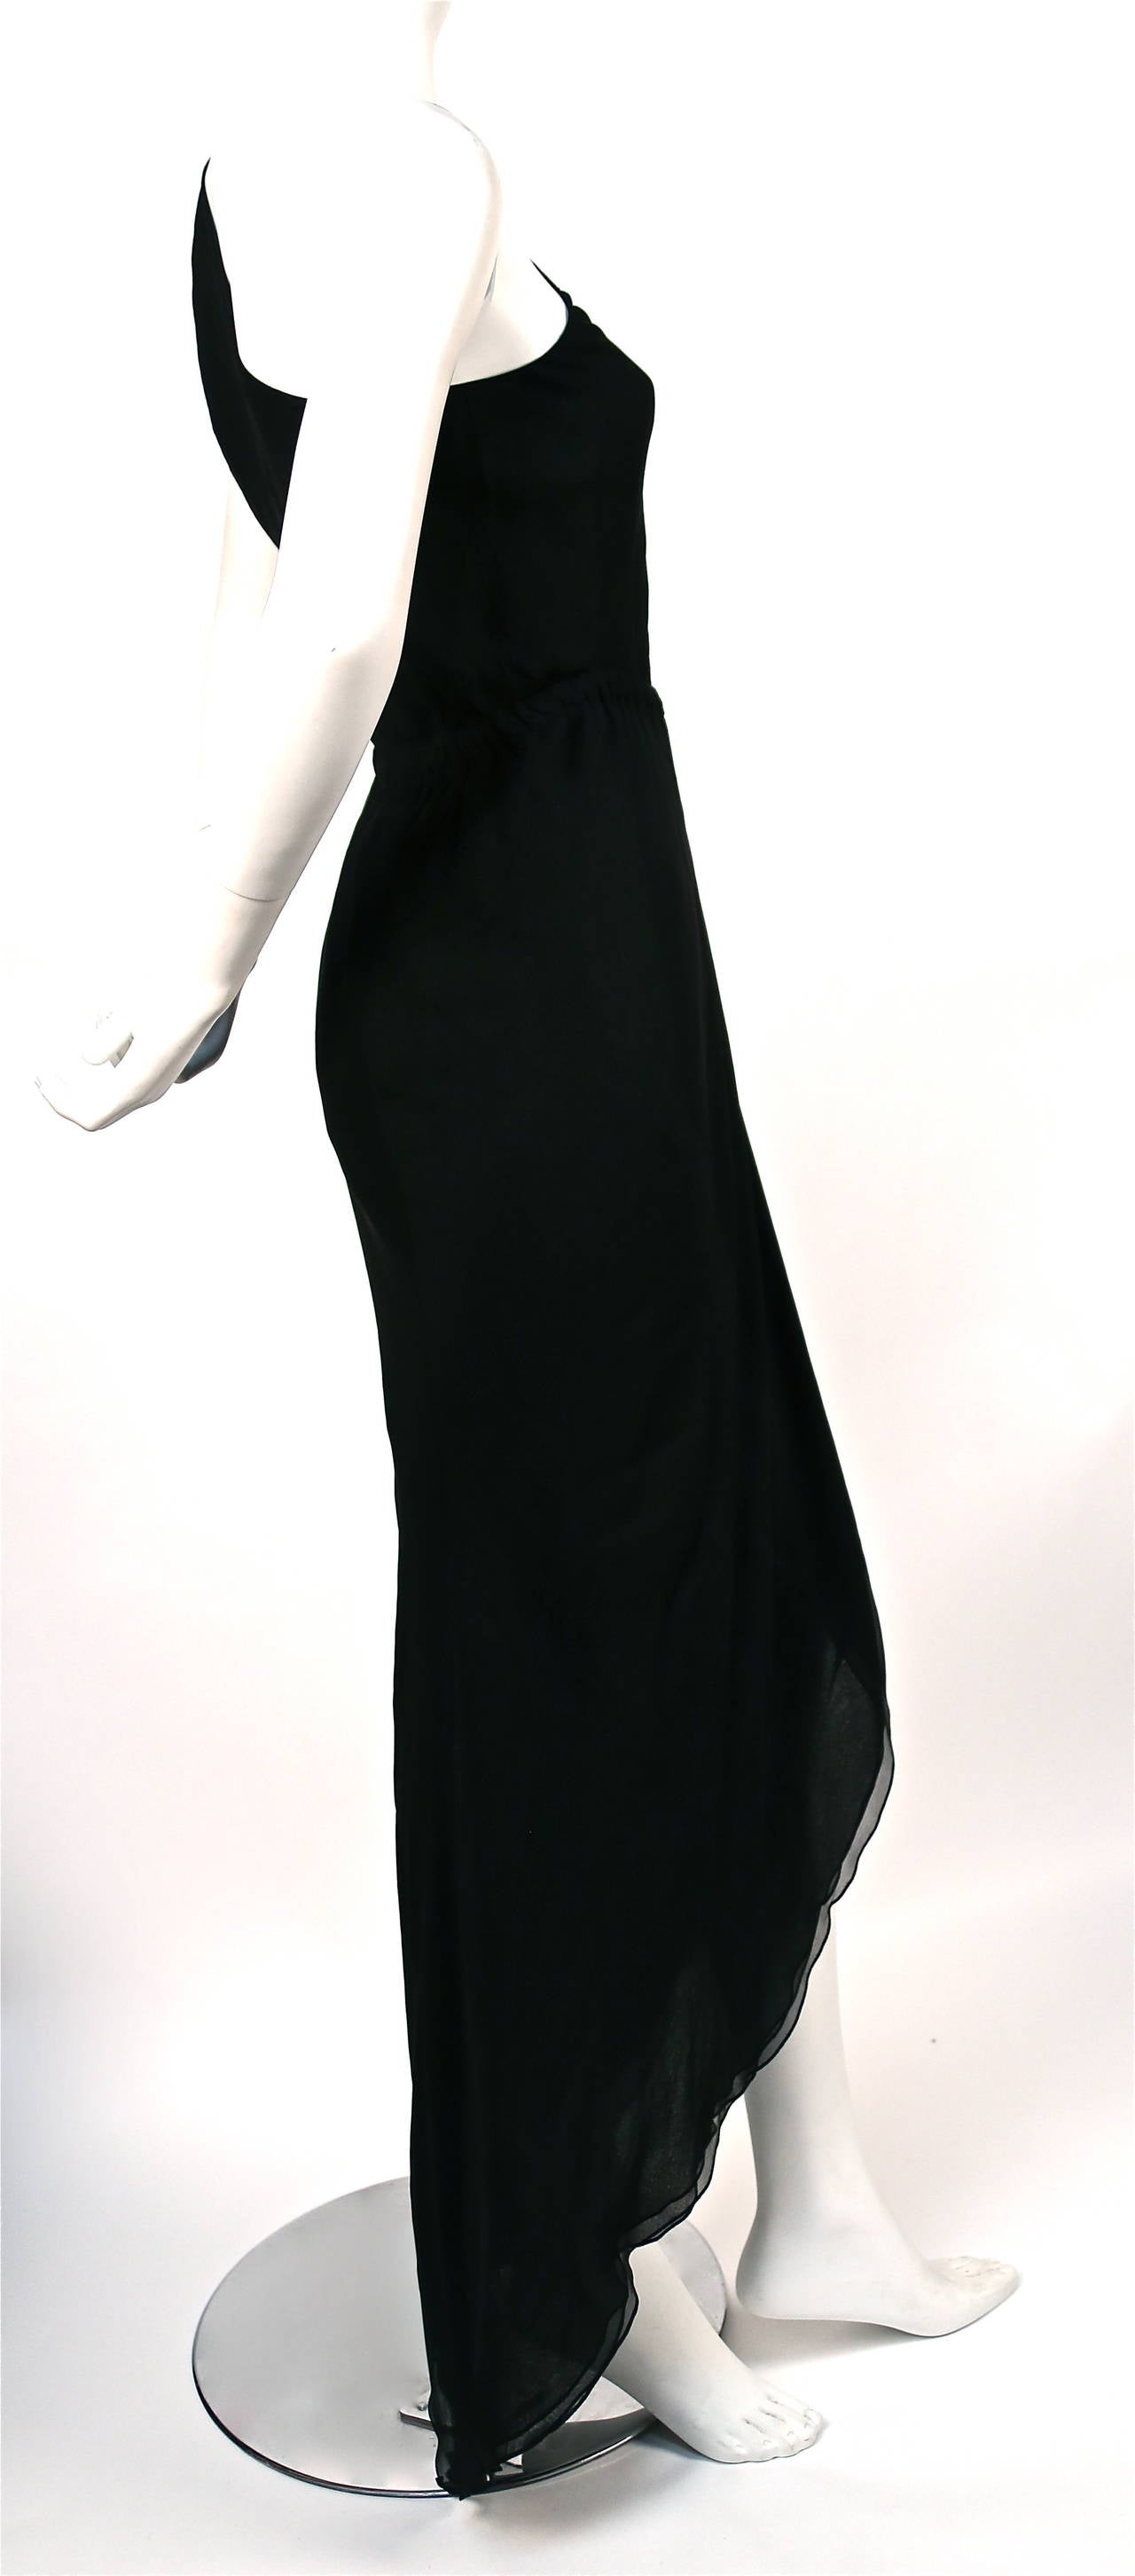 Jet black triple layer silk chiffon dress with asymmetrical shoulder, raised elasticized waistline and flounced hemline from hailstone dating to the 1970s. No size is indicated although this dress best fits a size 2 or more petite 4. Fabric is cut